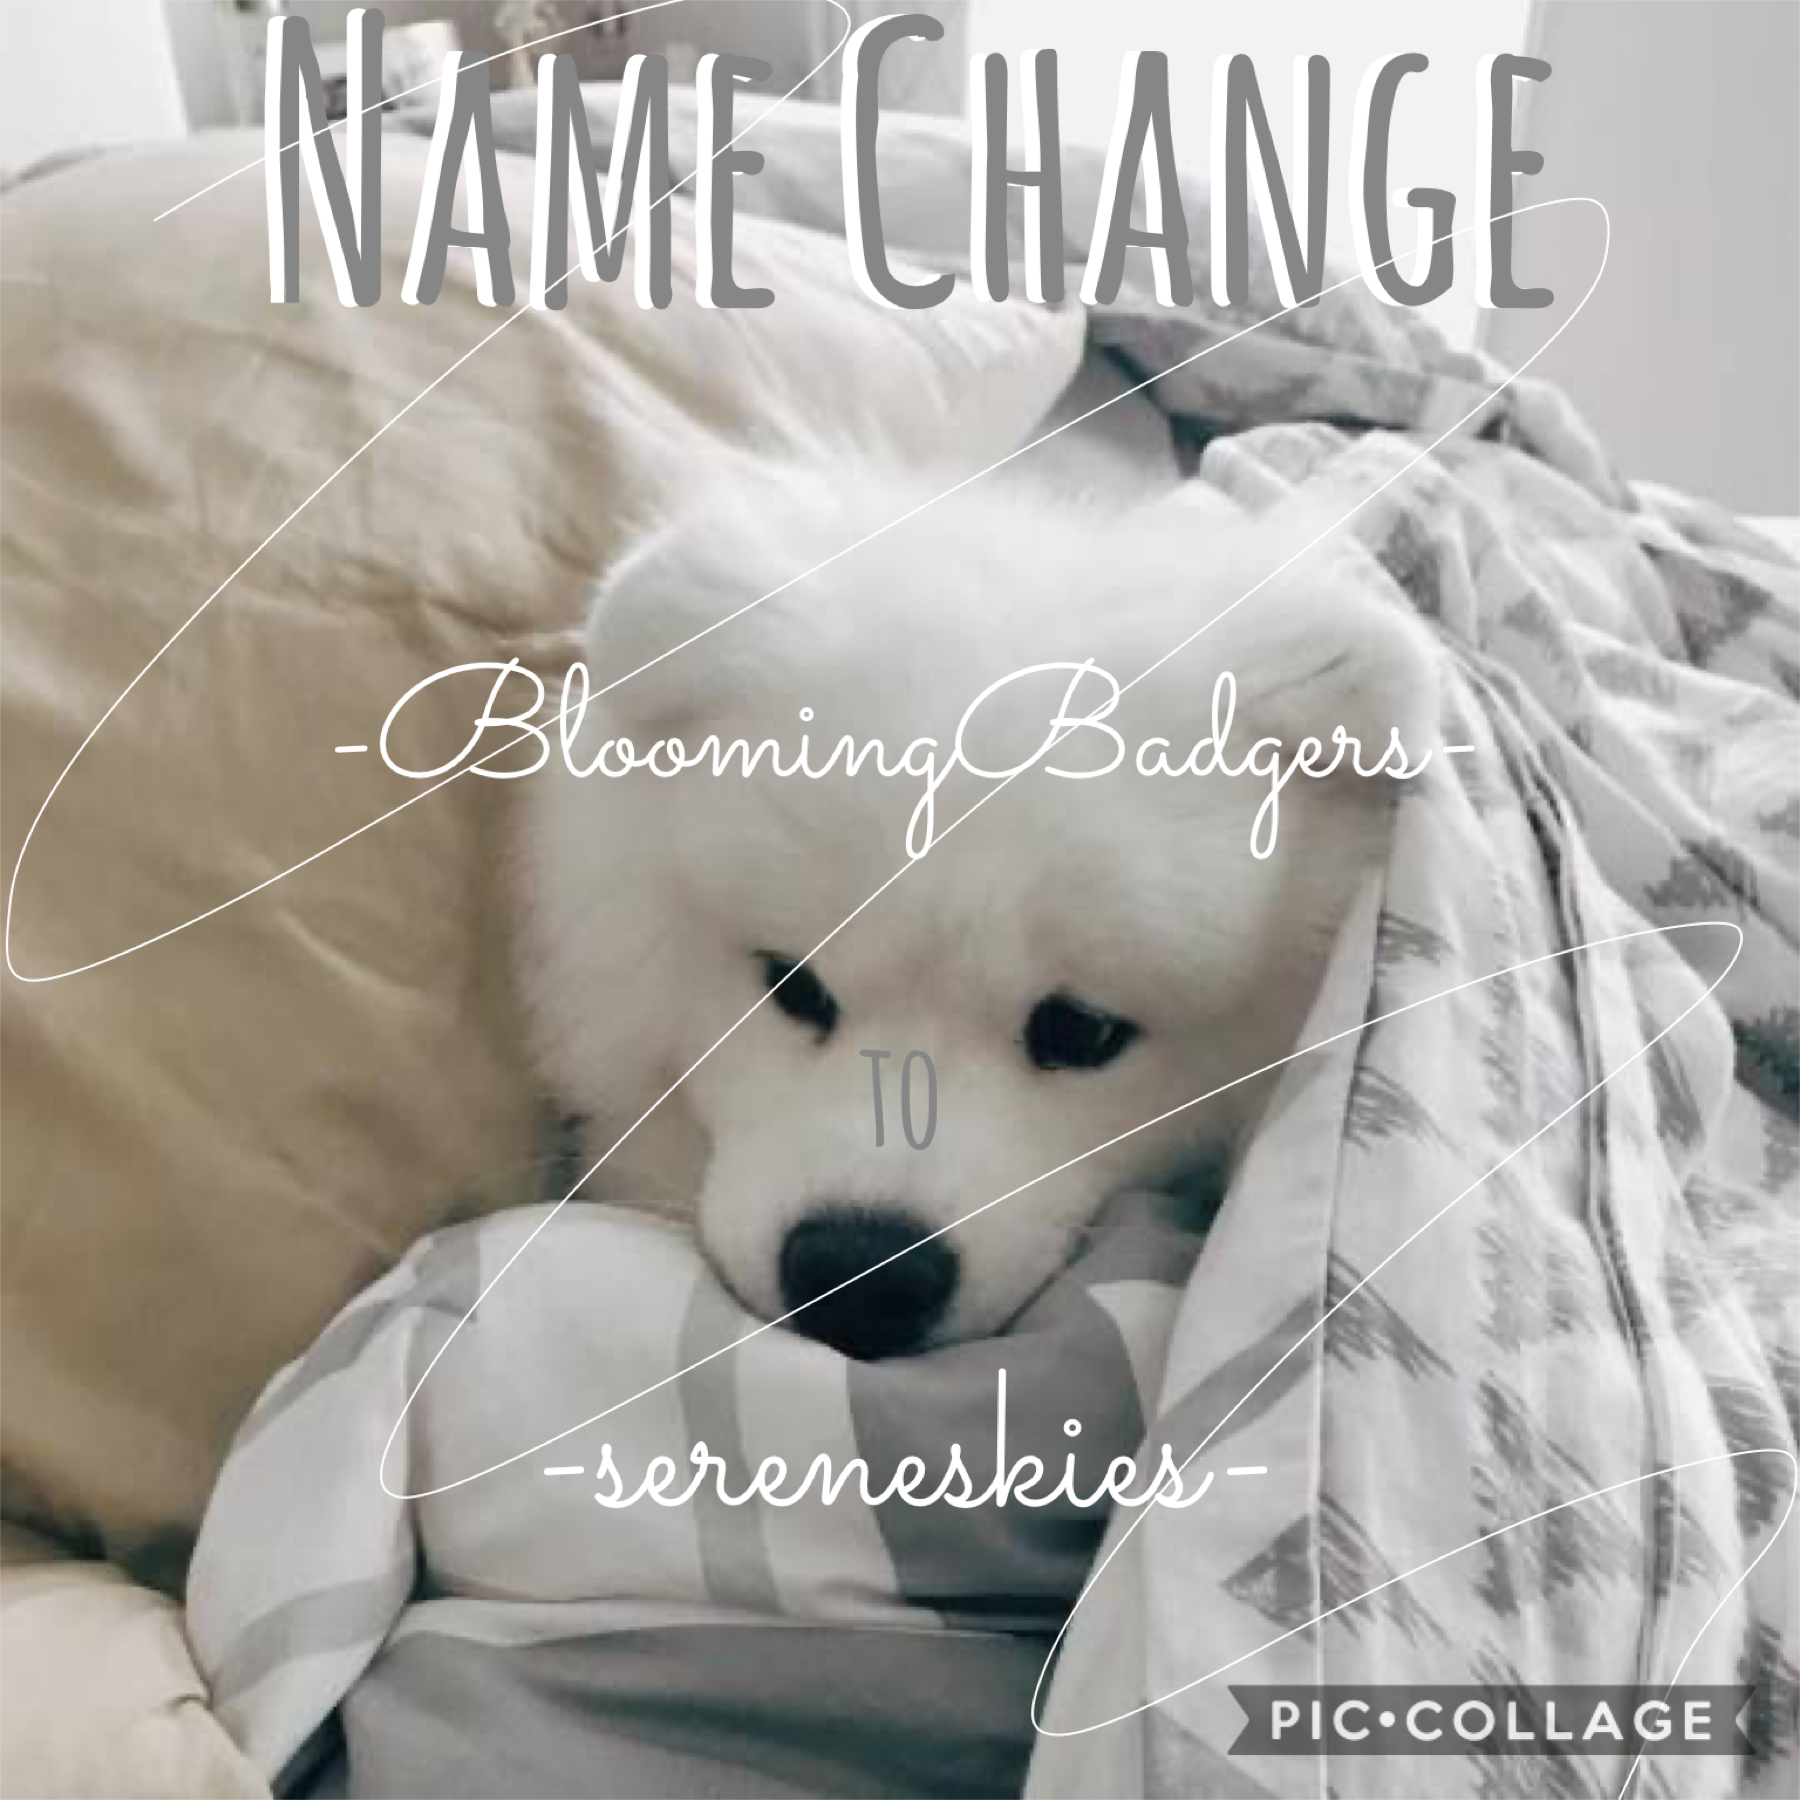 t a p

heyy y’all 
i think it’s time for a fresh name :)
i hope you like my new name
please go enter my fall games!!!!
and i would love it if you checkout my other socials😉
💞byee💞